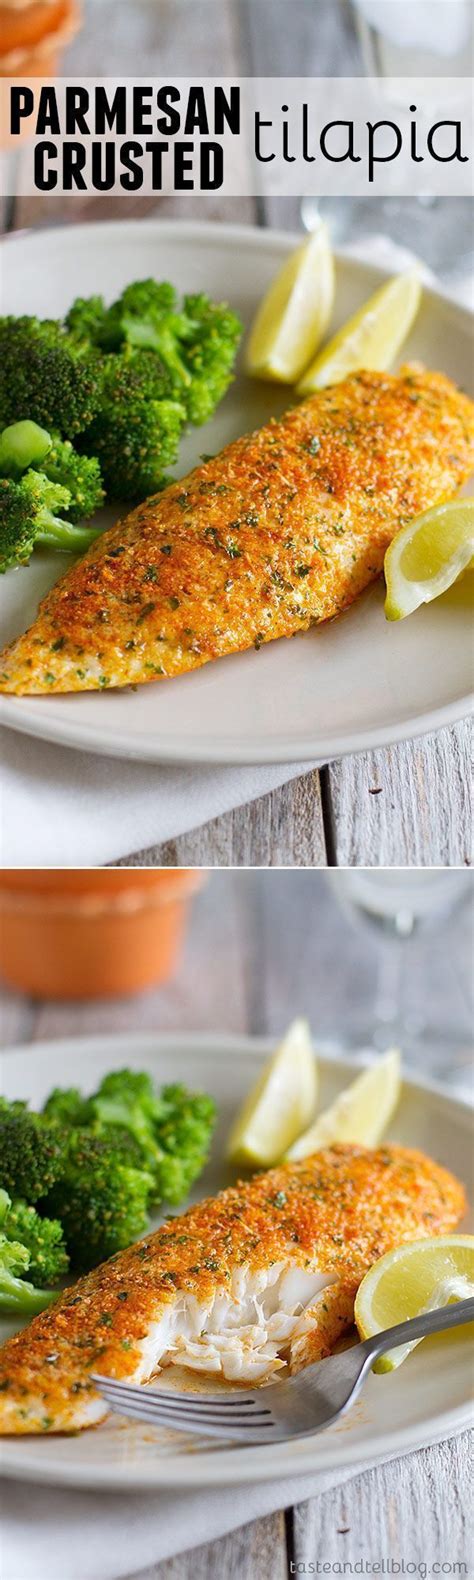 Baked tilapia or flounder is one of my favorite dishes to make. 12+ Capital Diabetes Recipes Simple Ideas (With images) | Easy fish recipes, Recipes, Tilapia ...